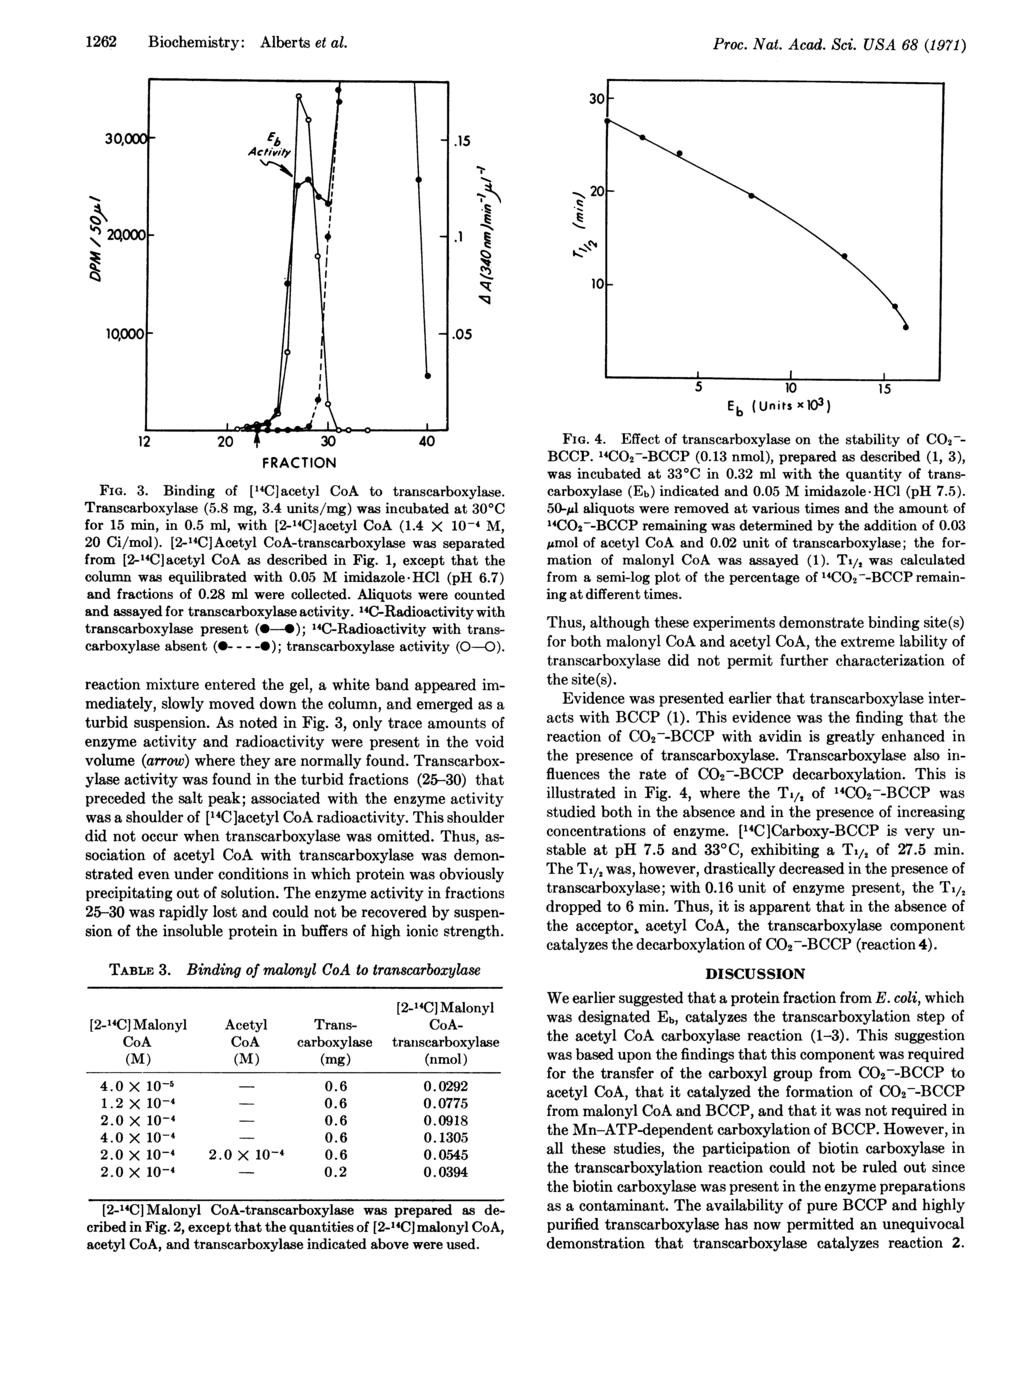 1262 Biochemistry: Alberts et al. Proc. Nat. Acad. Sci. USA 68 (1971) FIG. 3. Binding of ["4C]acetyl CoA to transcarboxylase. Transcarboxylase (5.8 mg, 3.